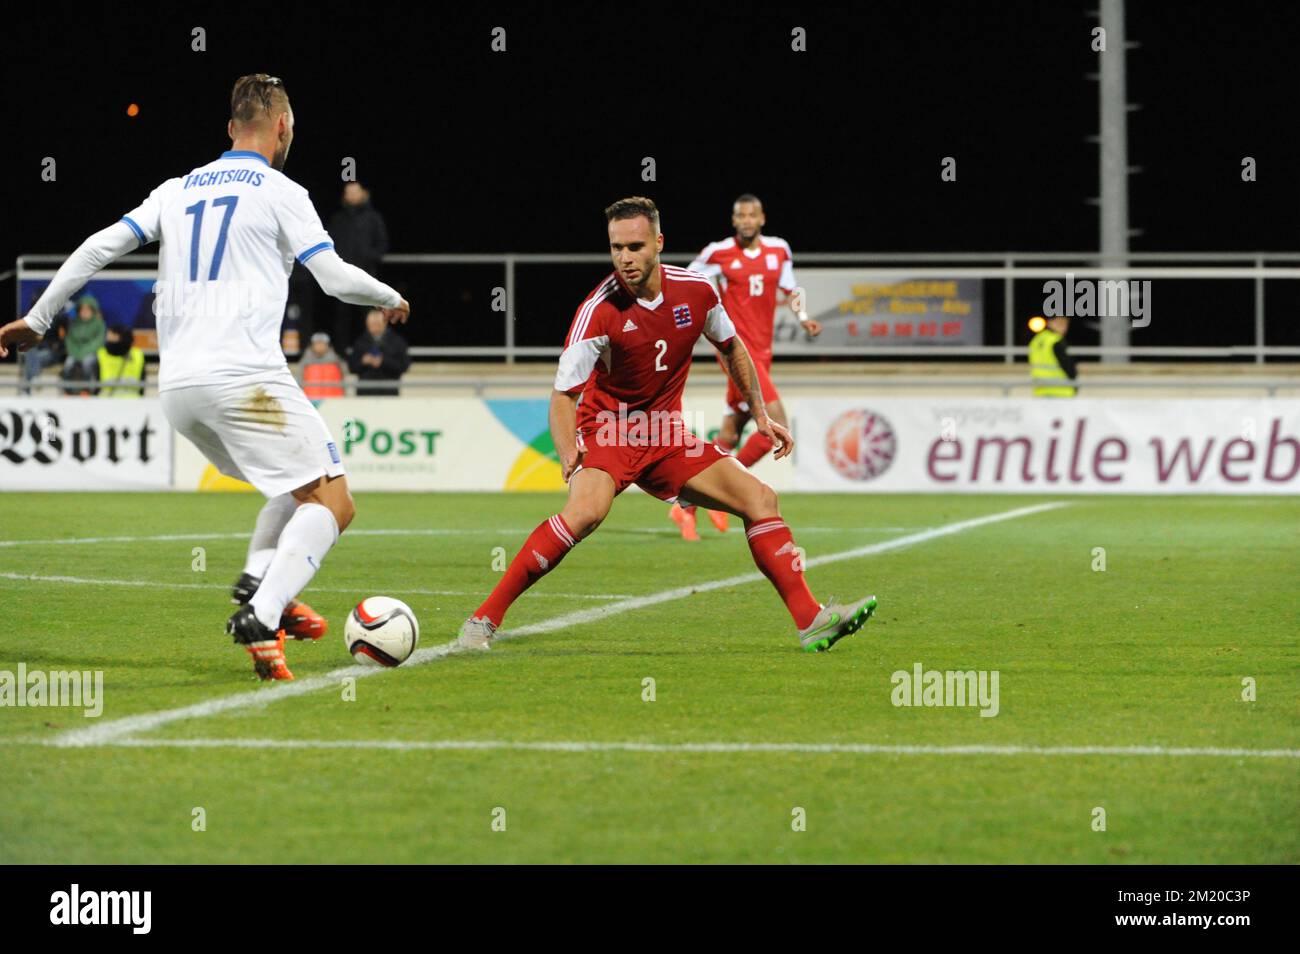 20151113 - DIFFERDANGE, LUXEMBOURG: Greece's Panagiotis Tachtsidis and Luxembourg's Maxime Chanot fight for the ball during a friendly soccer game between Luxembourg national team and Greece, in Differdange, Luxembourg, Friday 13 November 2015. BELGA PHOTO SOPHIE KIP Stock Photo